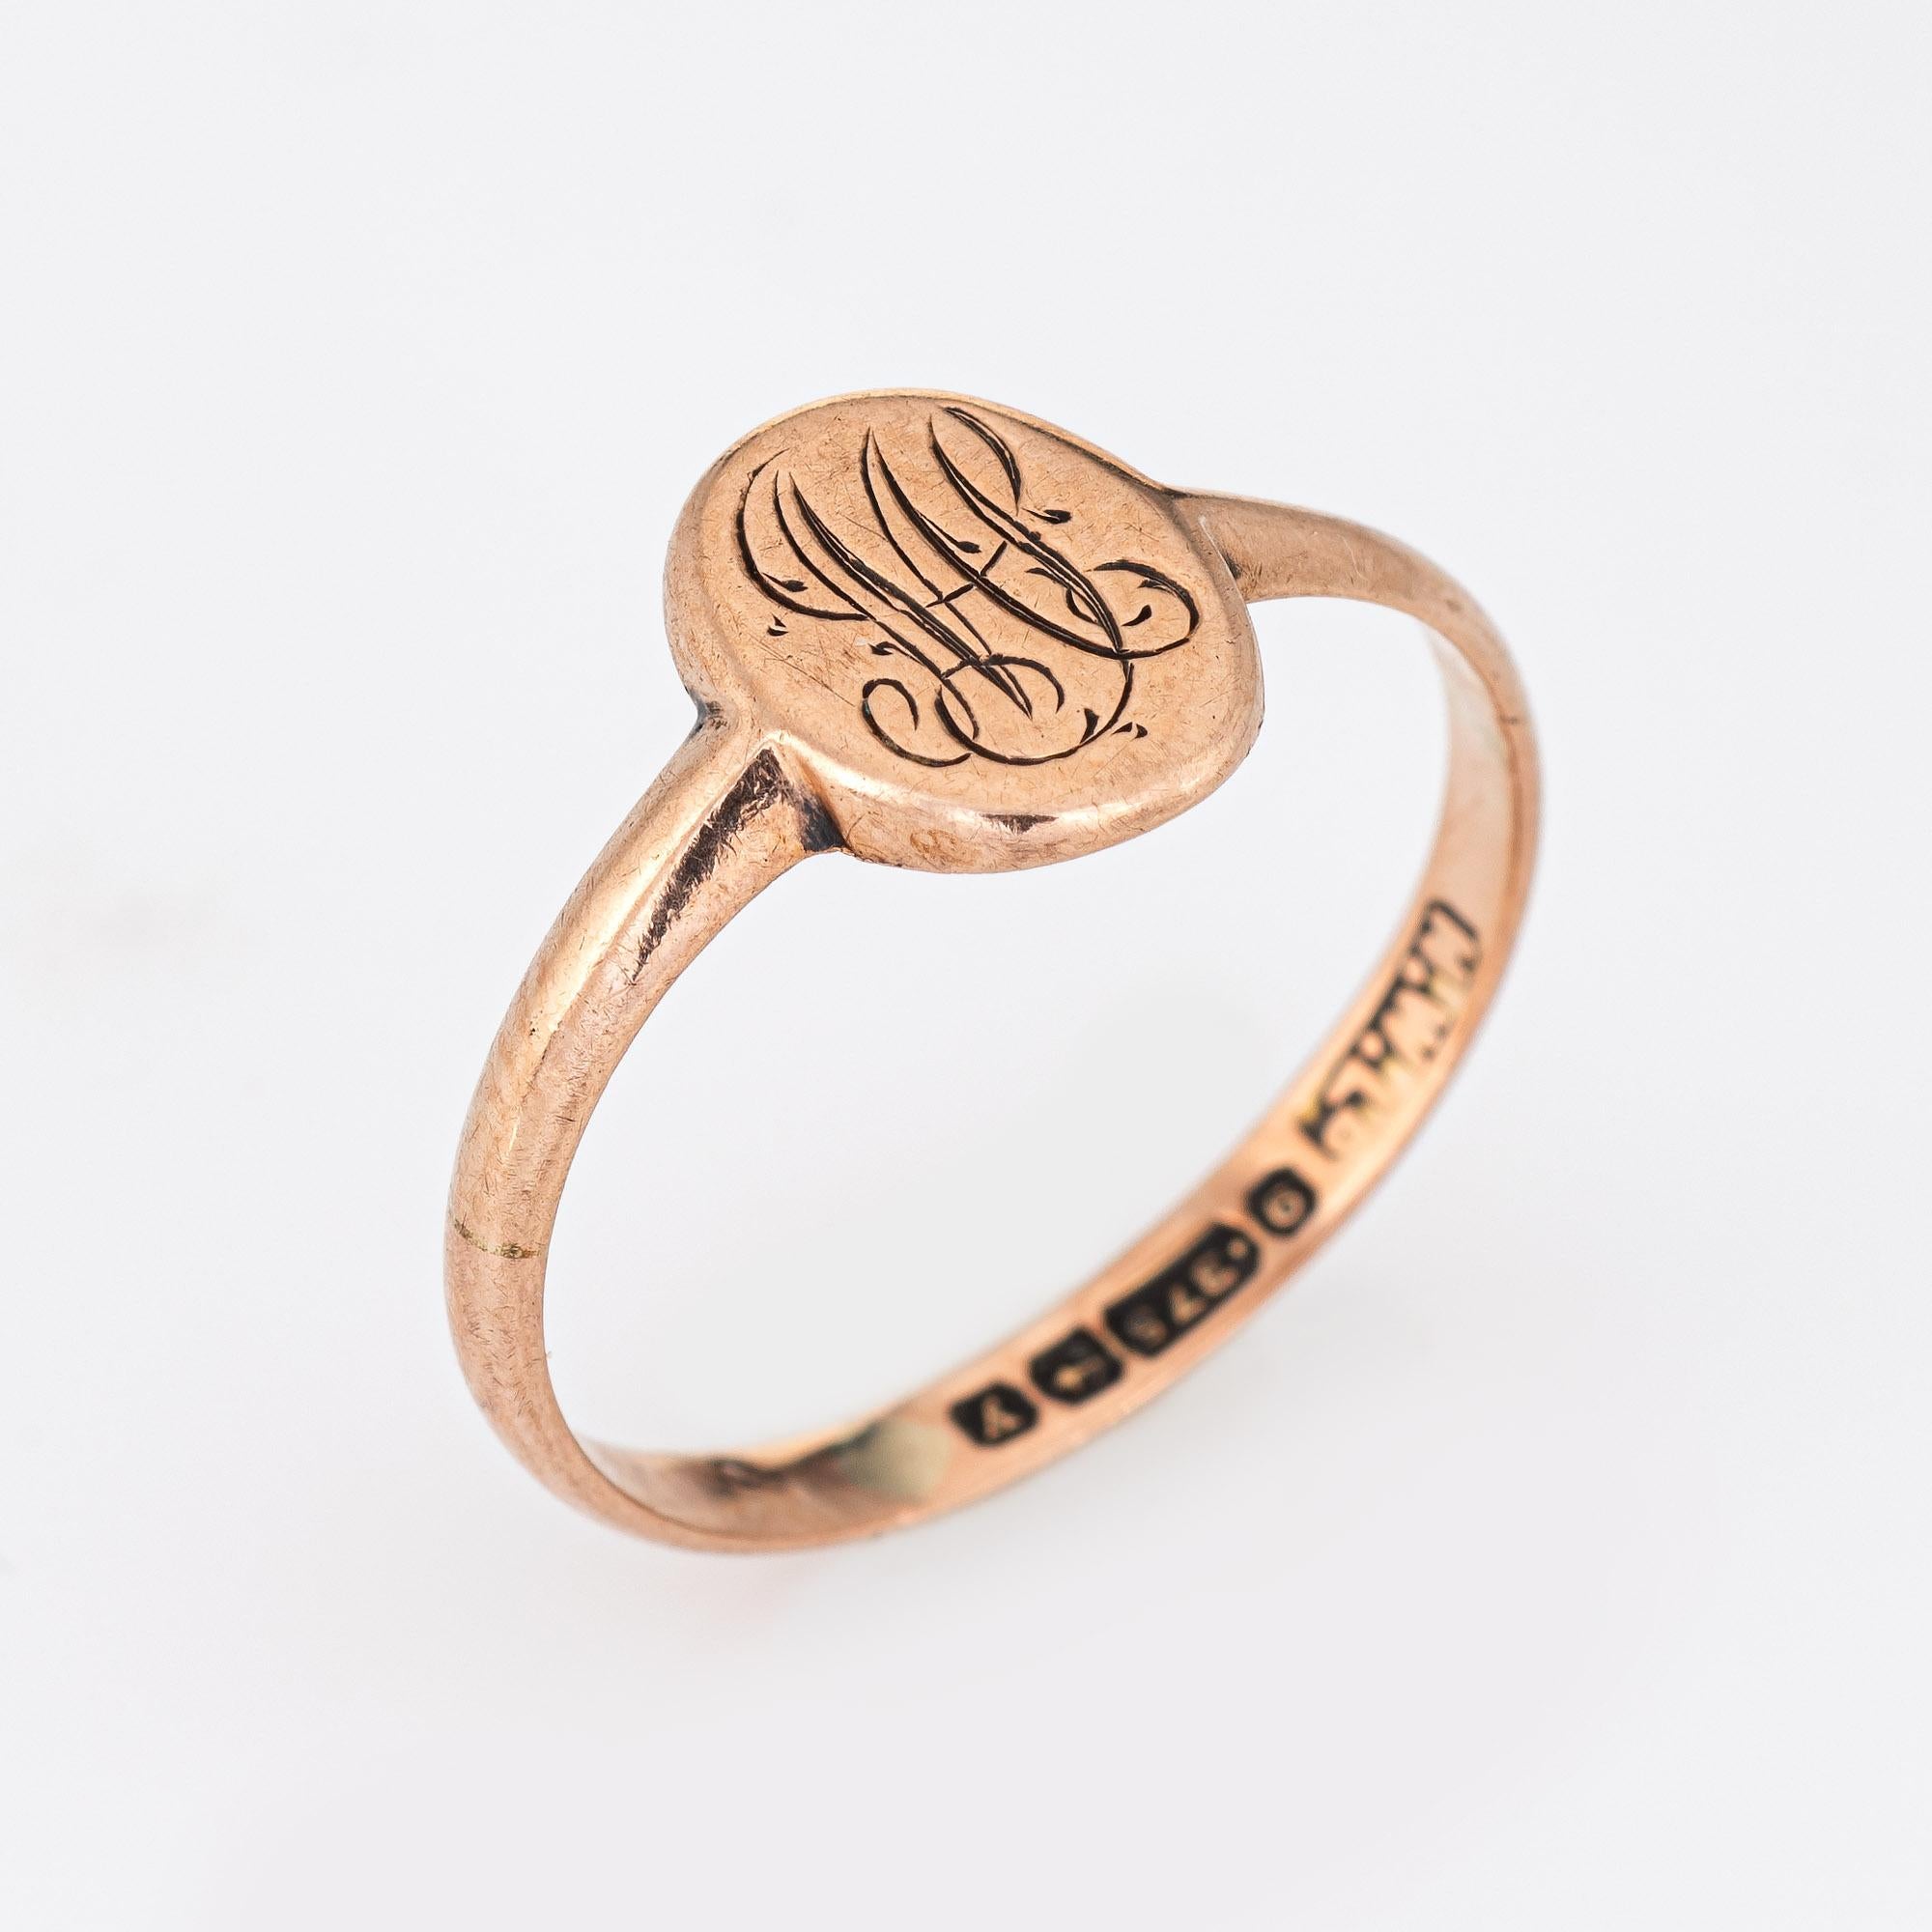 Lovely vintage Art Deco era small signet ring (circa 1923), crafted in 9 karat rose gold. 

The small oval signet is engraved with the initials 